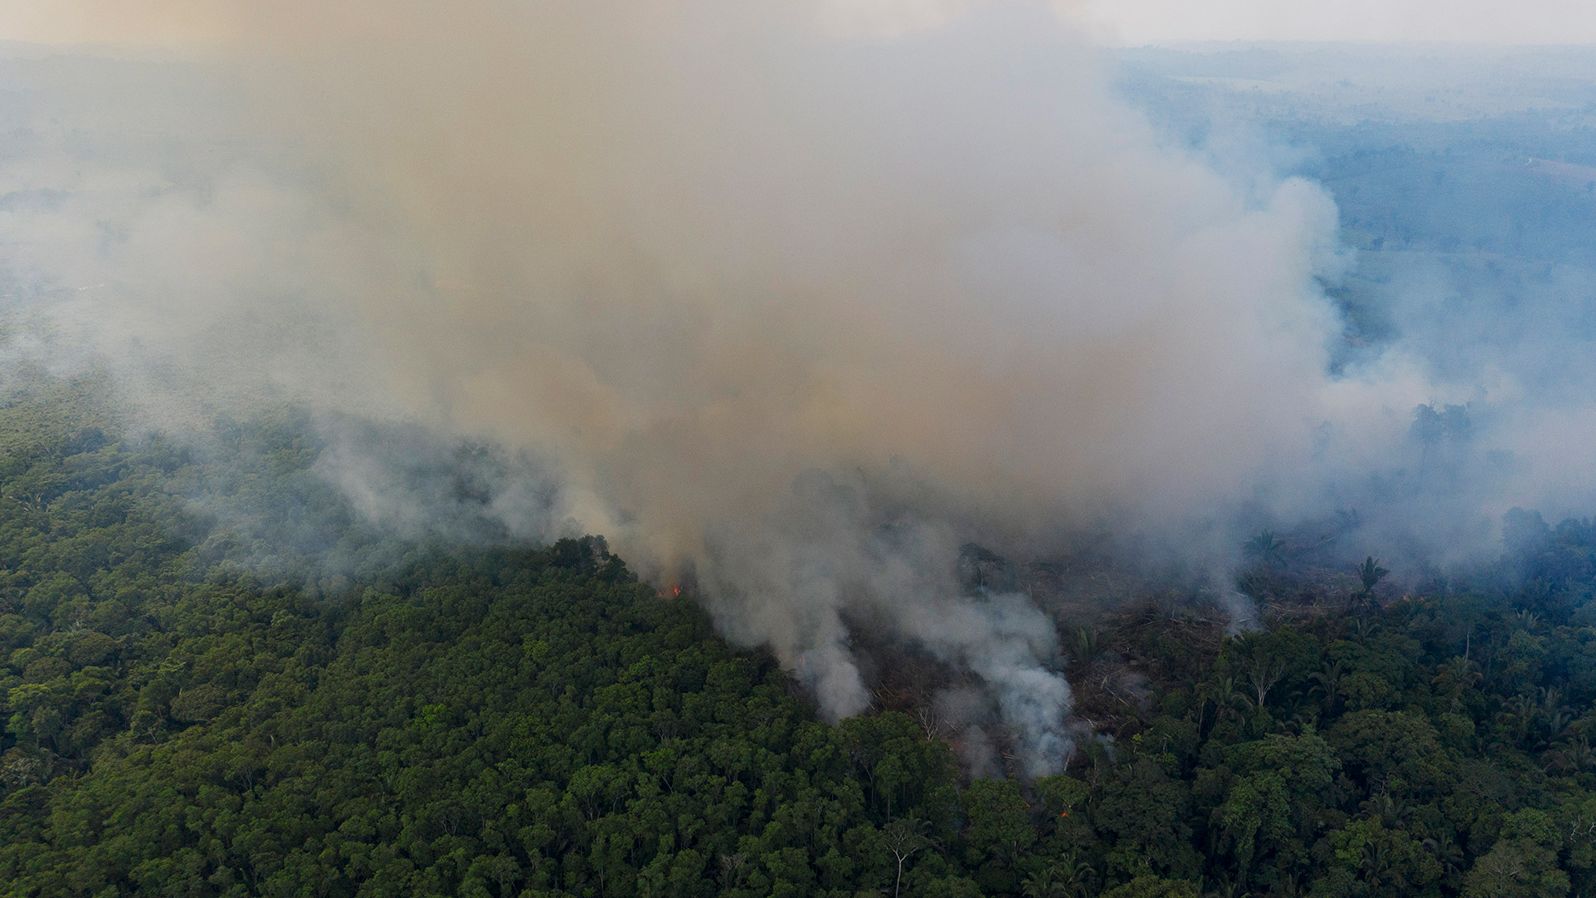 Smoke rises from a fire in the Amazon rainforest in Ruropolis, Brazil on November 29, 2019. 